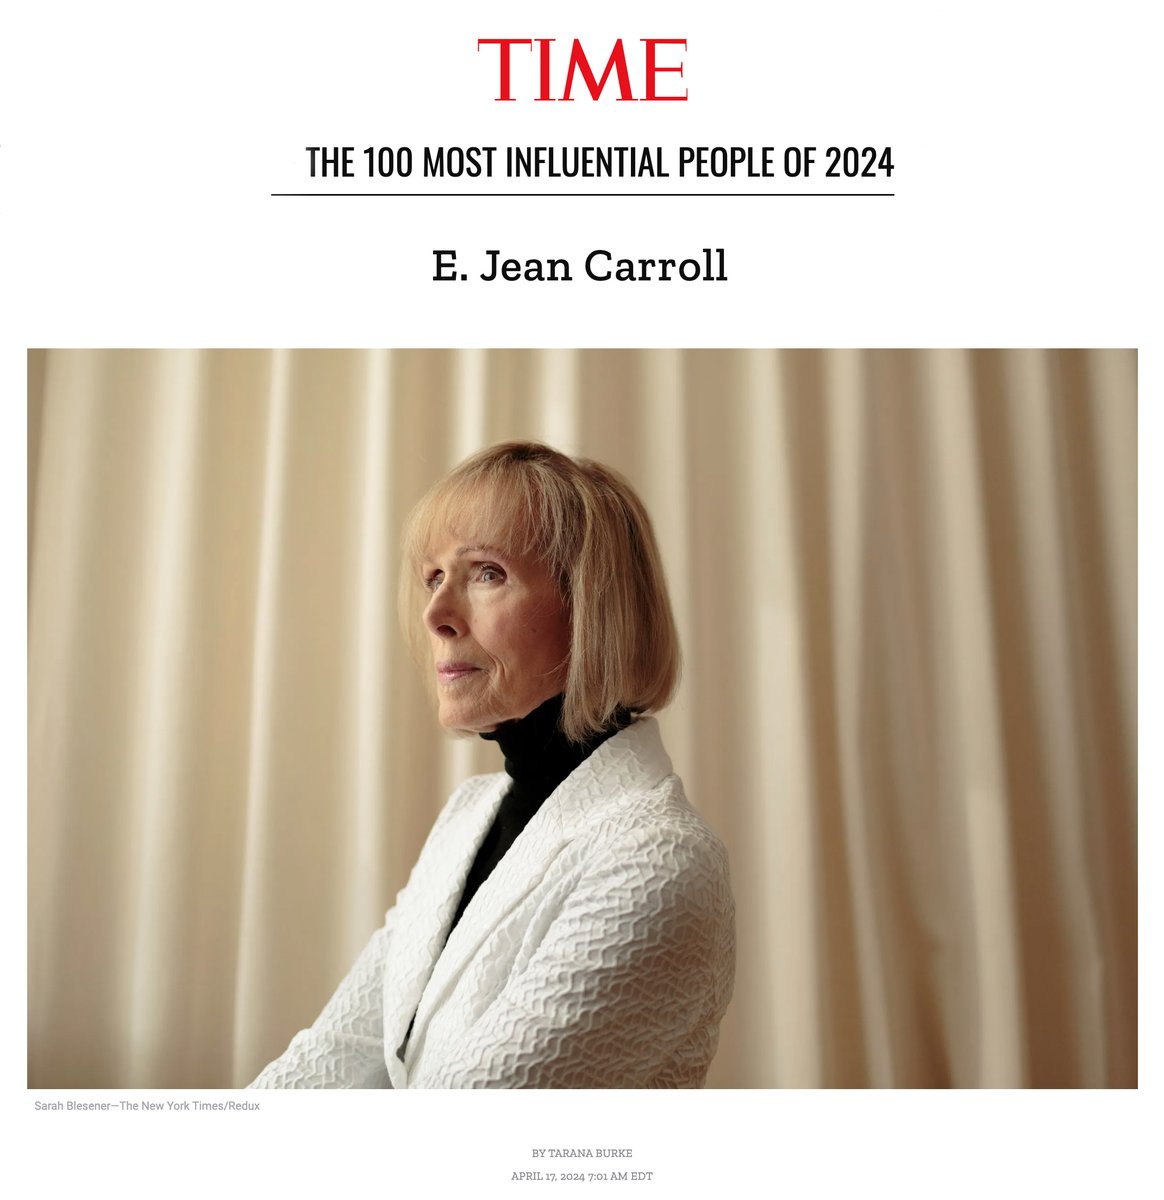 Photo of E. Jean Carroll by Sarah Blesener/The New York Times/Redux in Time magazine’s 100 Most Influential People of 2024. #sarahblesener @nytimesphoto @TIME